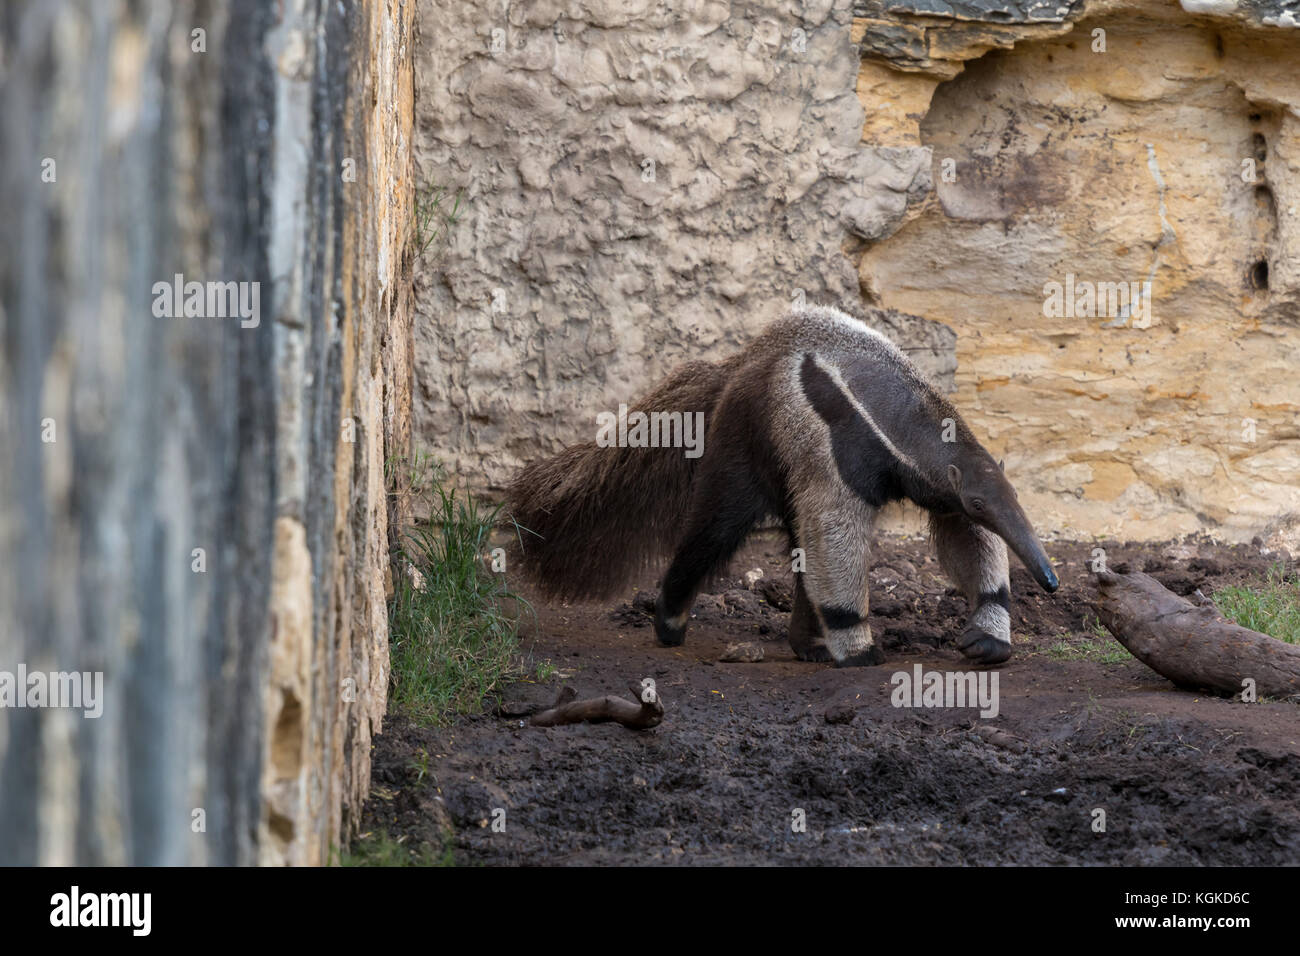 Anteater walking in Front of Wall Stock Photo